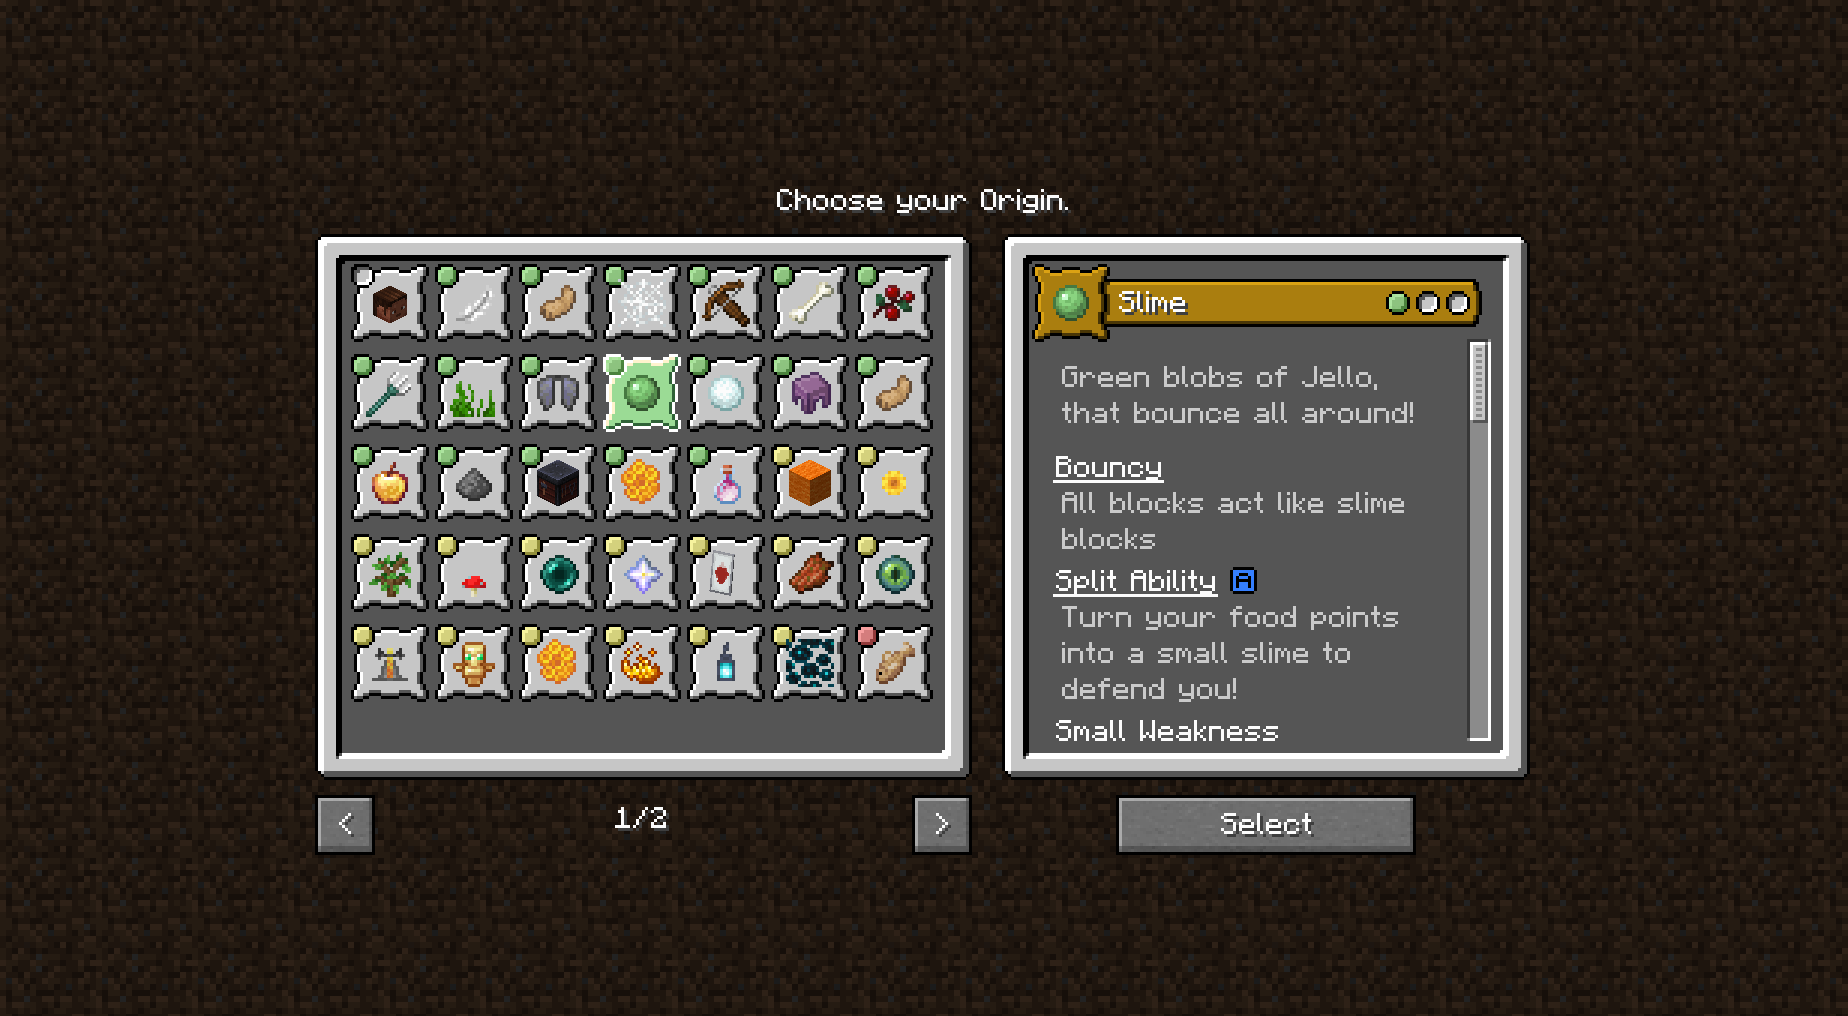 New Origins GUI, showing a array of origins, with two pages